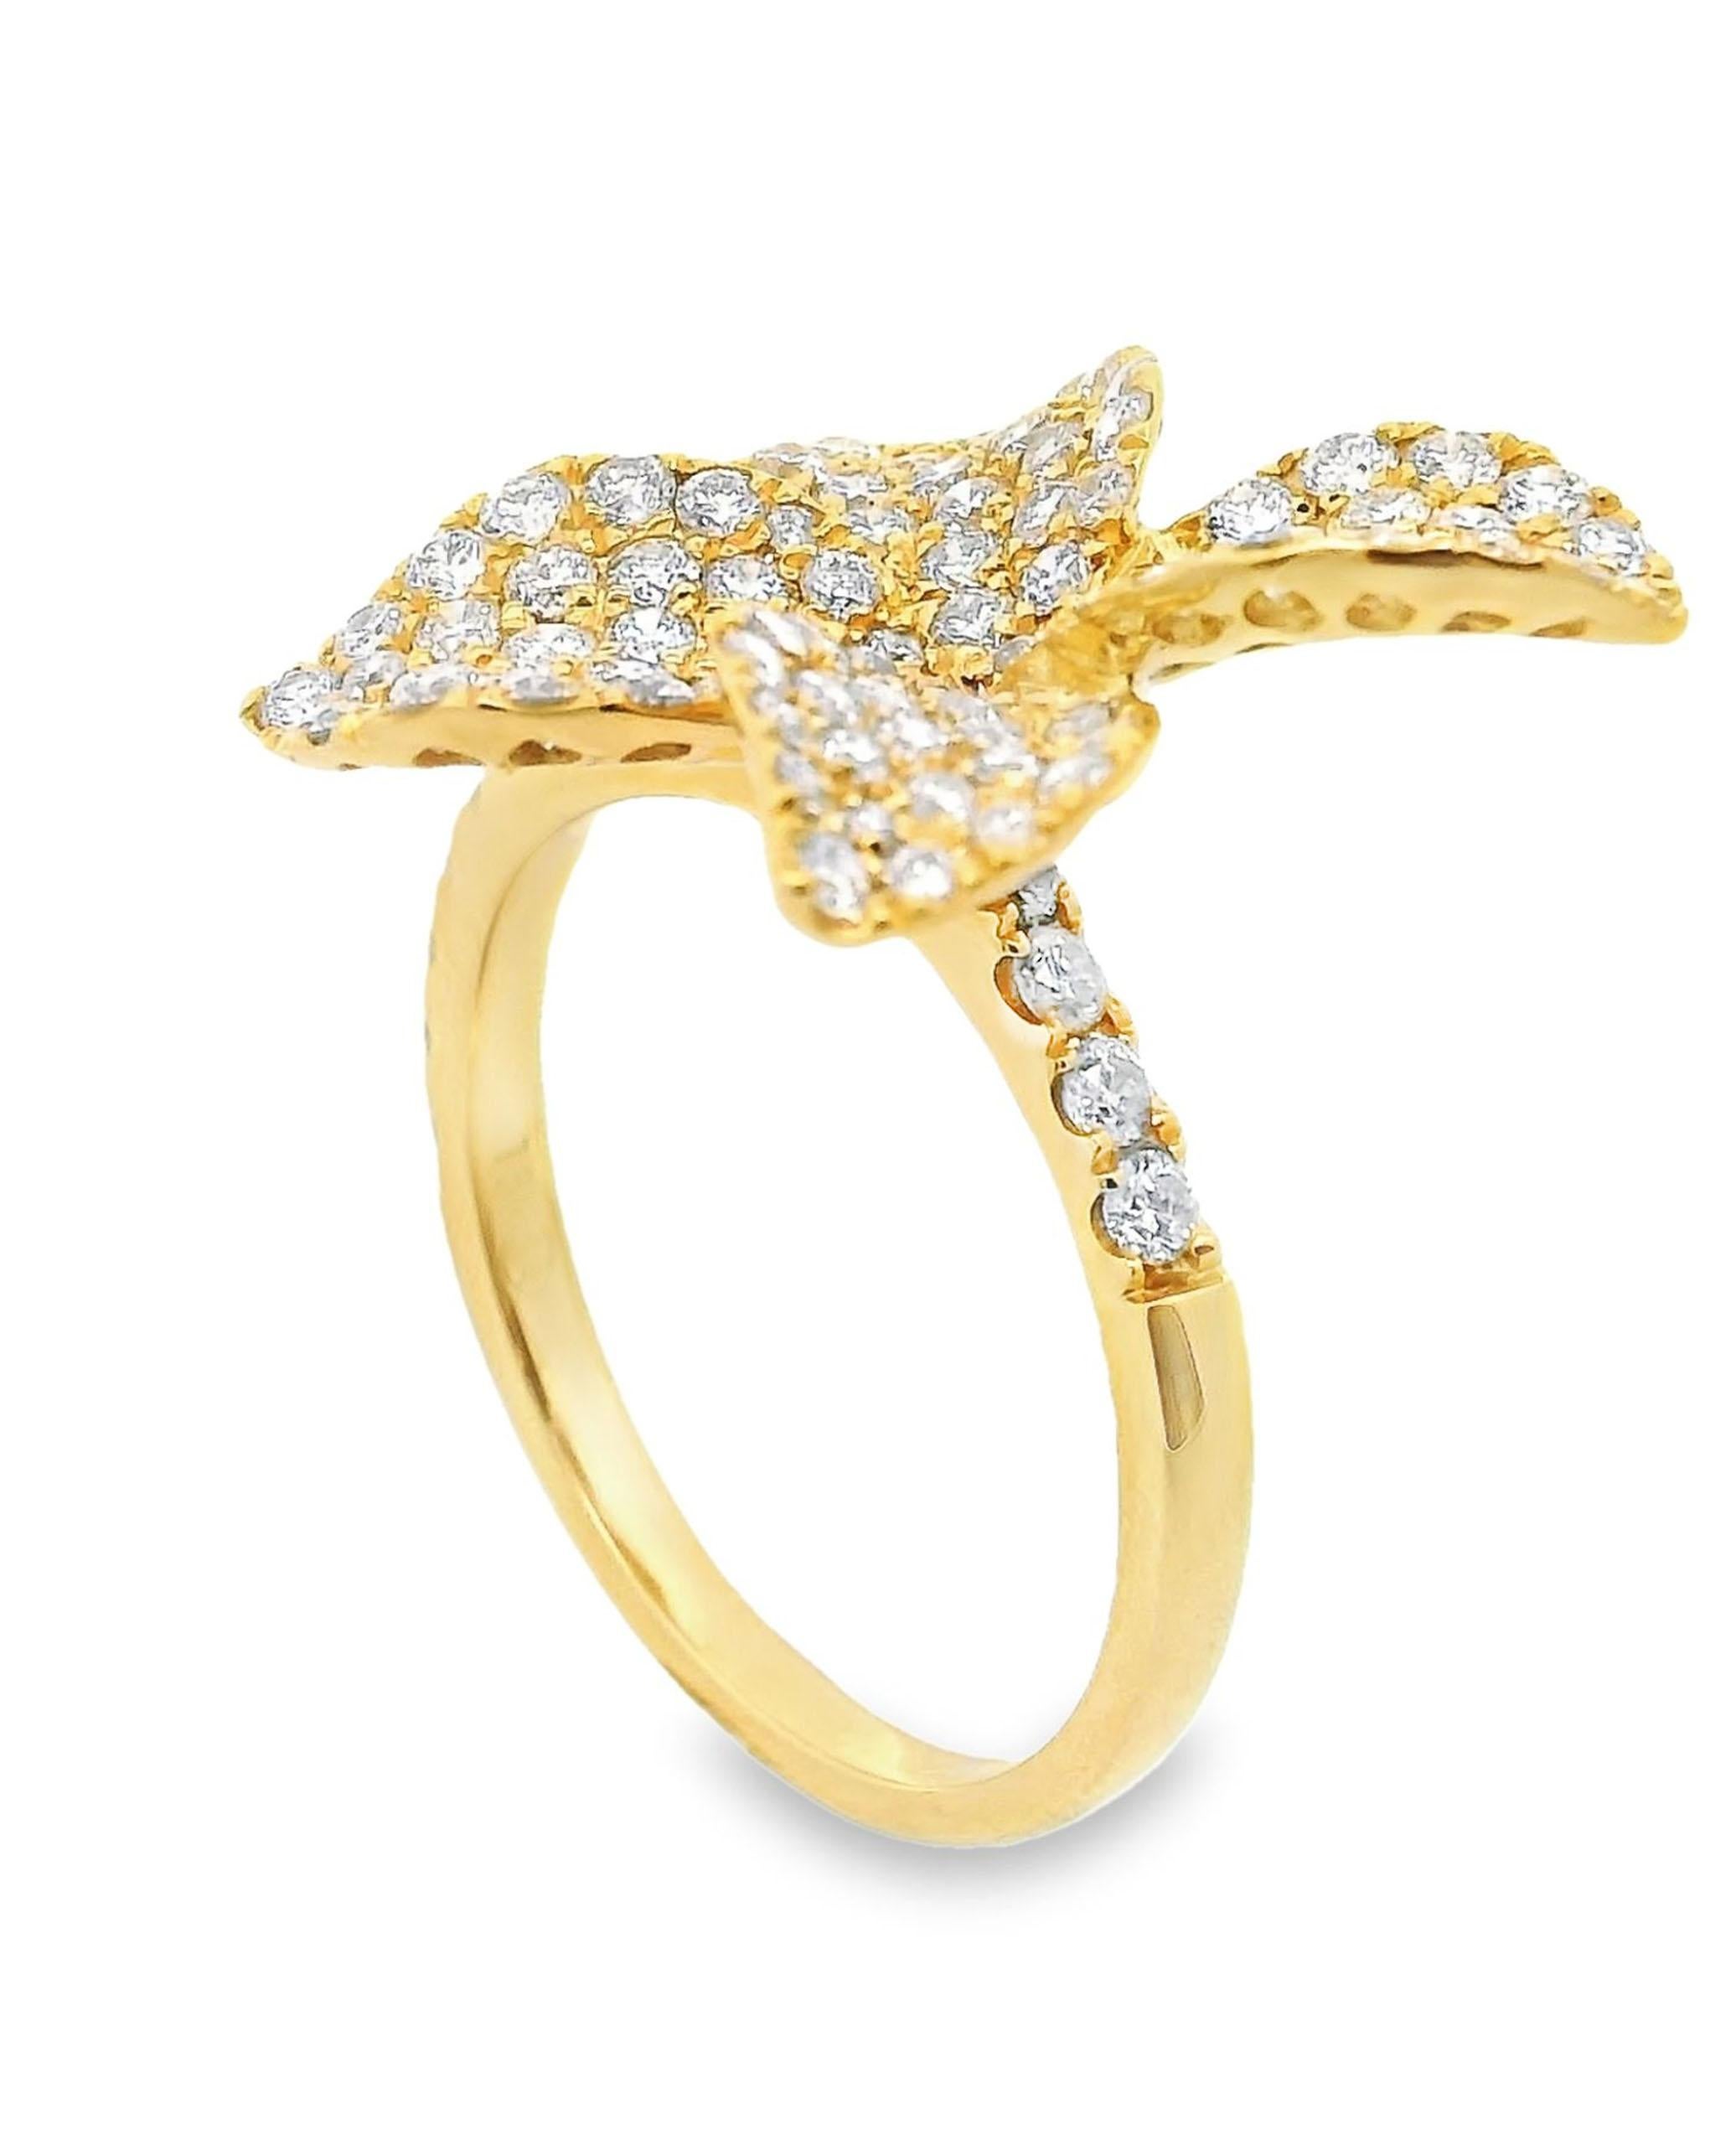 18K yellow gold flower ring with round brilliant-cut diamonds weighing 1.40 carats total.

* Diamonds are H/I color, SI clarity